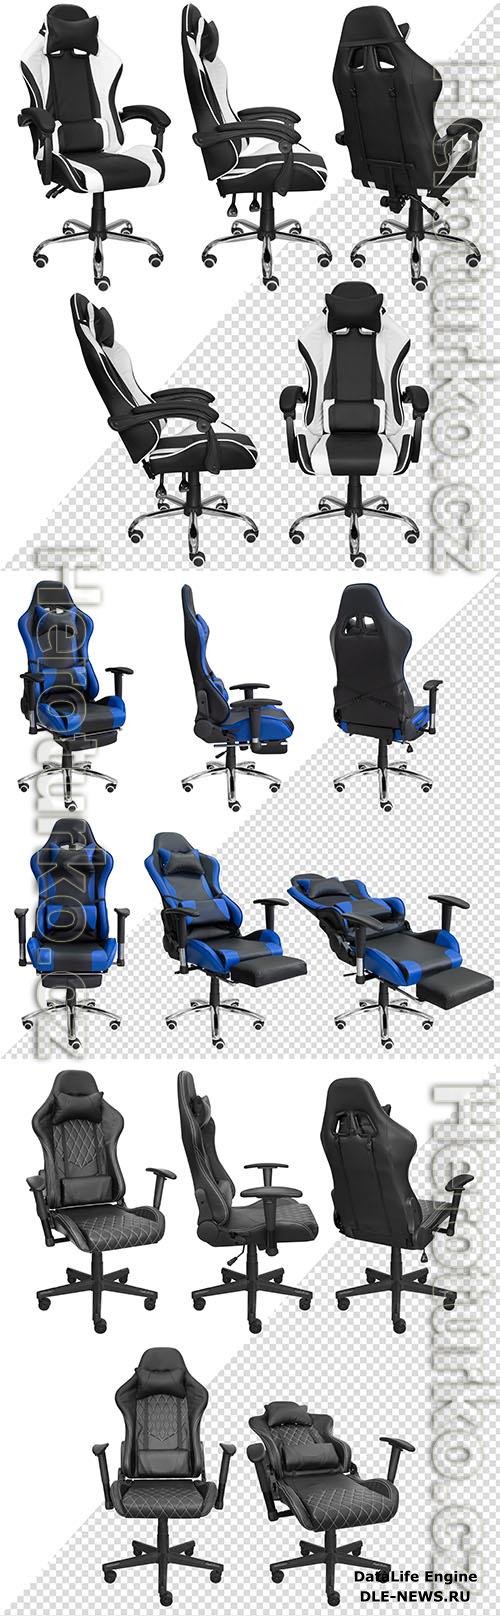 Gaming computer chair with adjustment design template psd